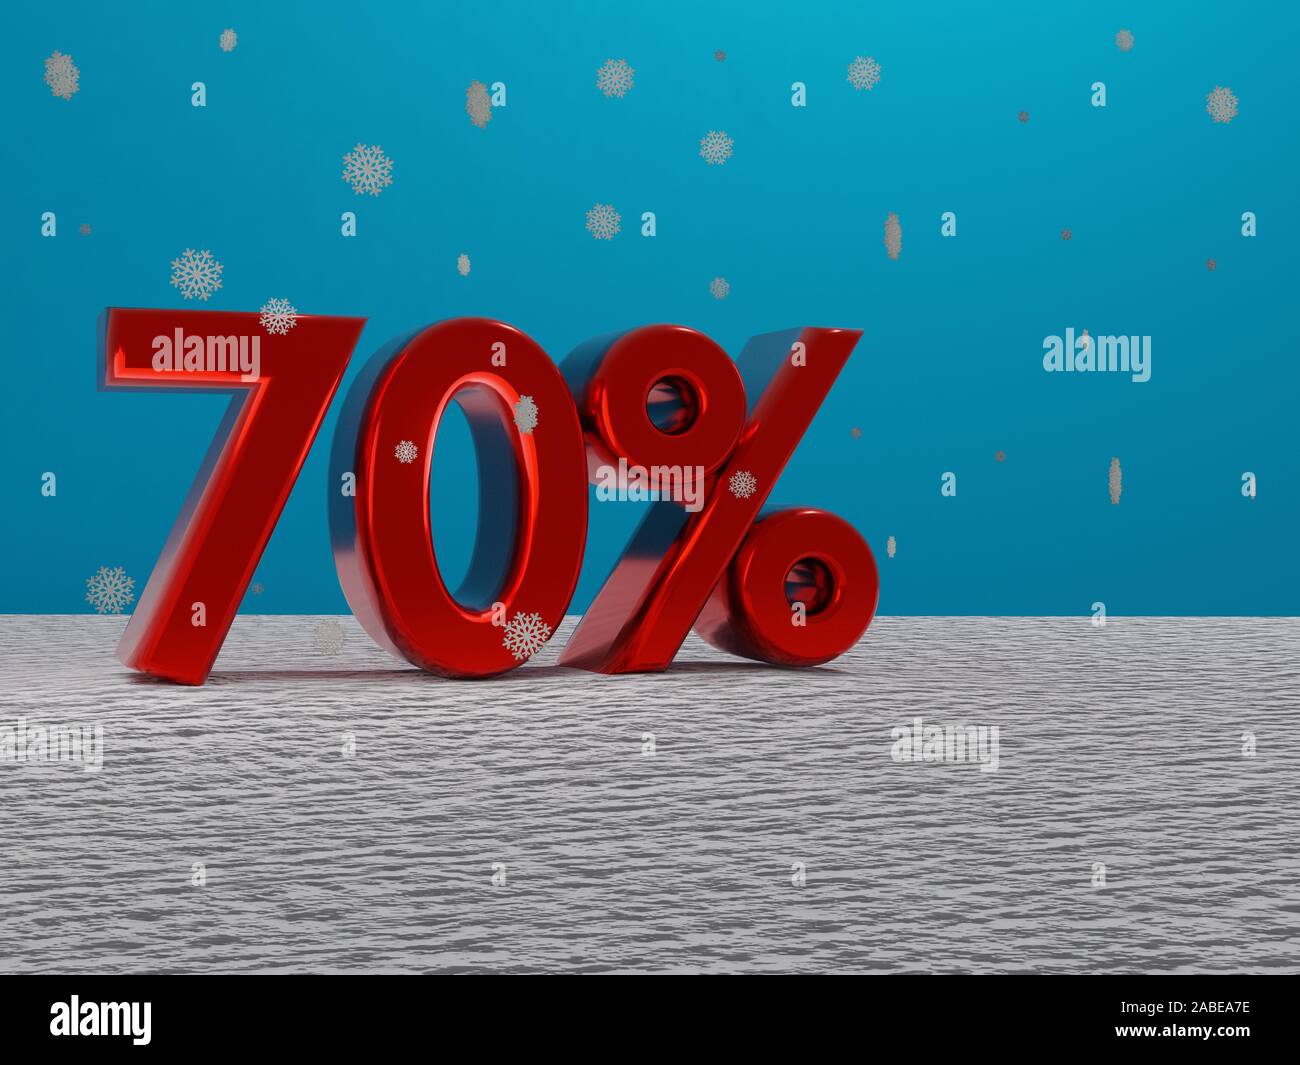 red 70 seventy percent sign in a winter setting with snow and snowflakes falling and blue background - 3d rendering Stock Photo